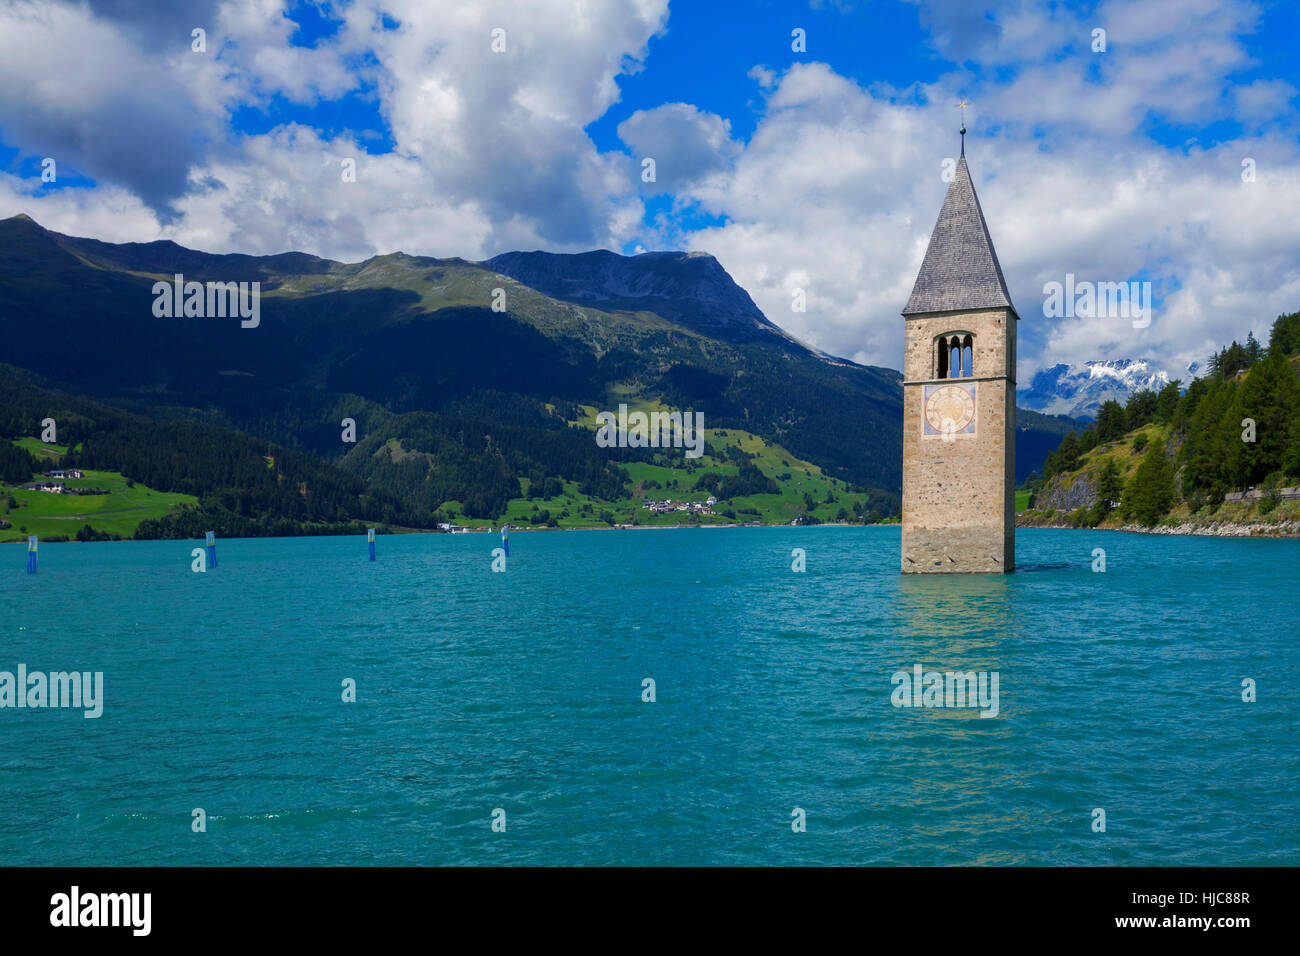 Submerged Curon church bell tower in lake, Vinschgau Valley, South Tyrol, Italy Stock Photo